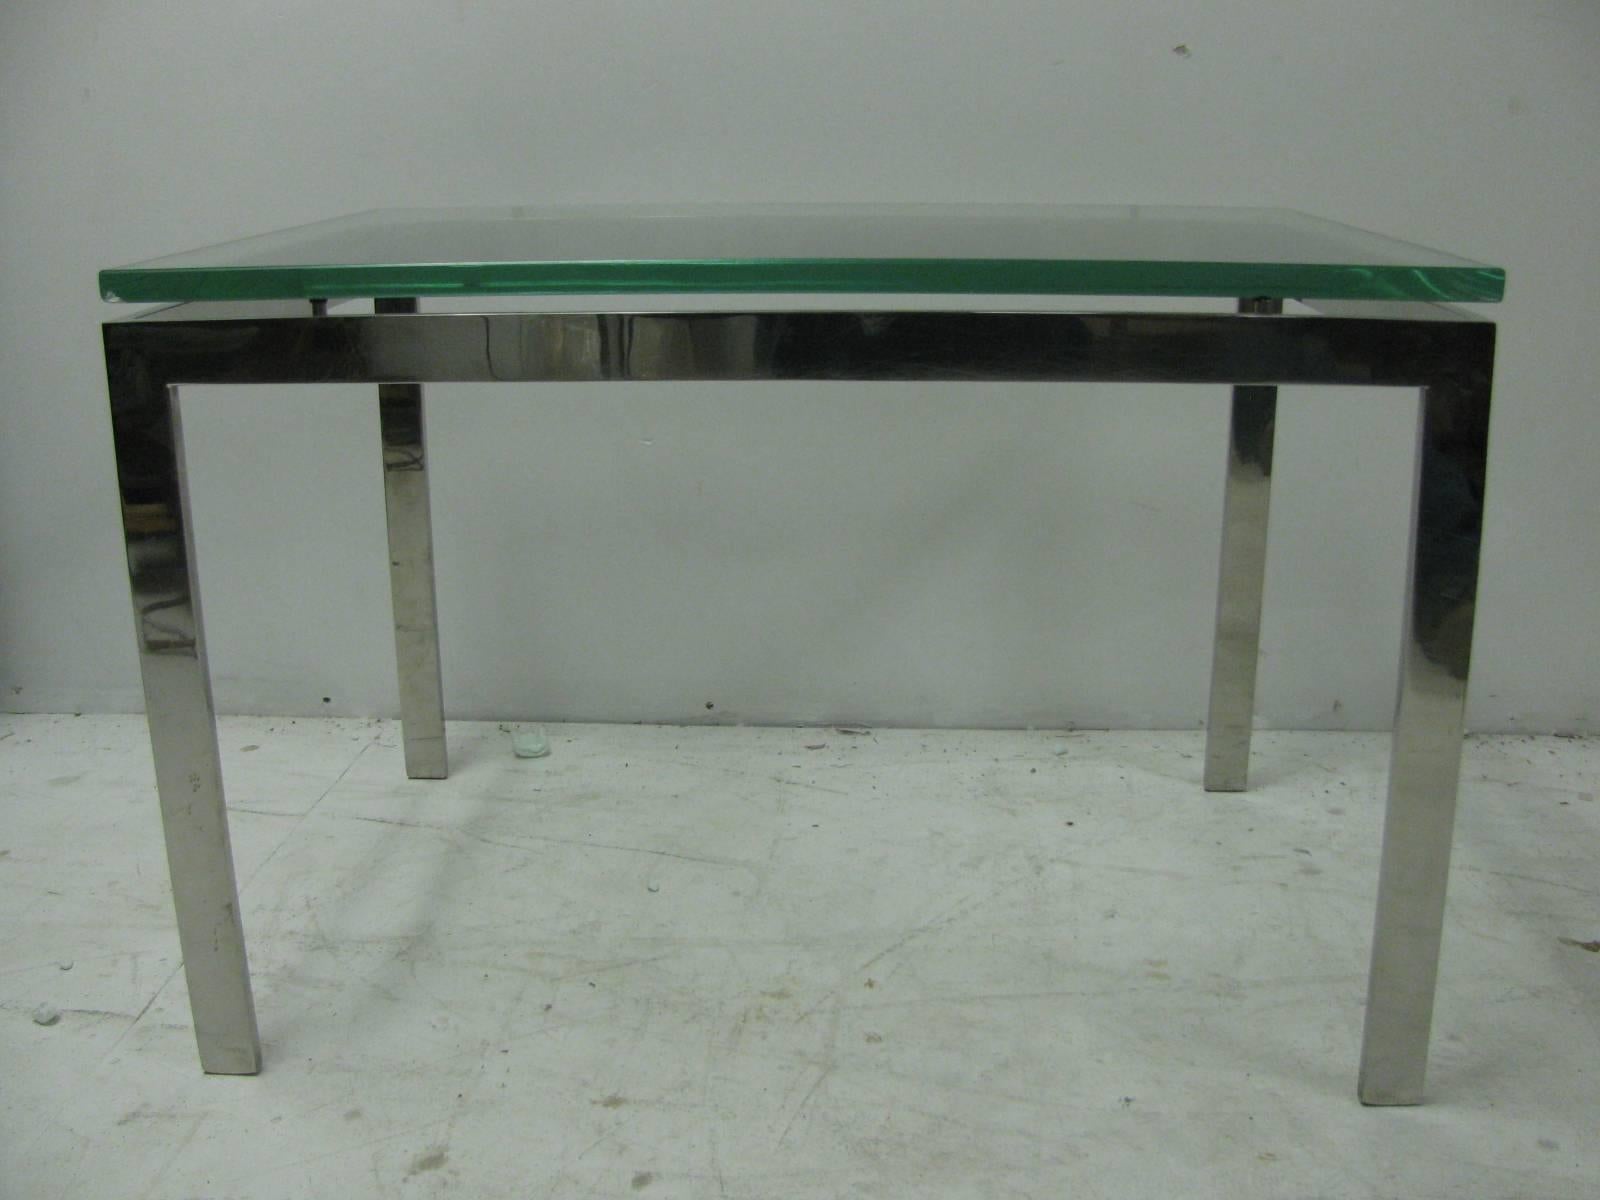 American Pair of Mid-Century Modern Nickel Chrome Steel Tables with Dimensional Glass Top For Sale